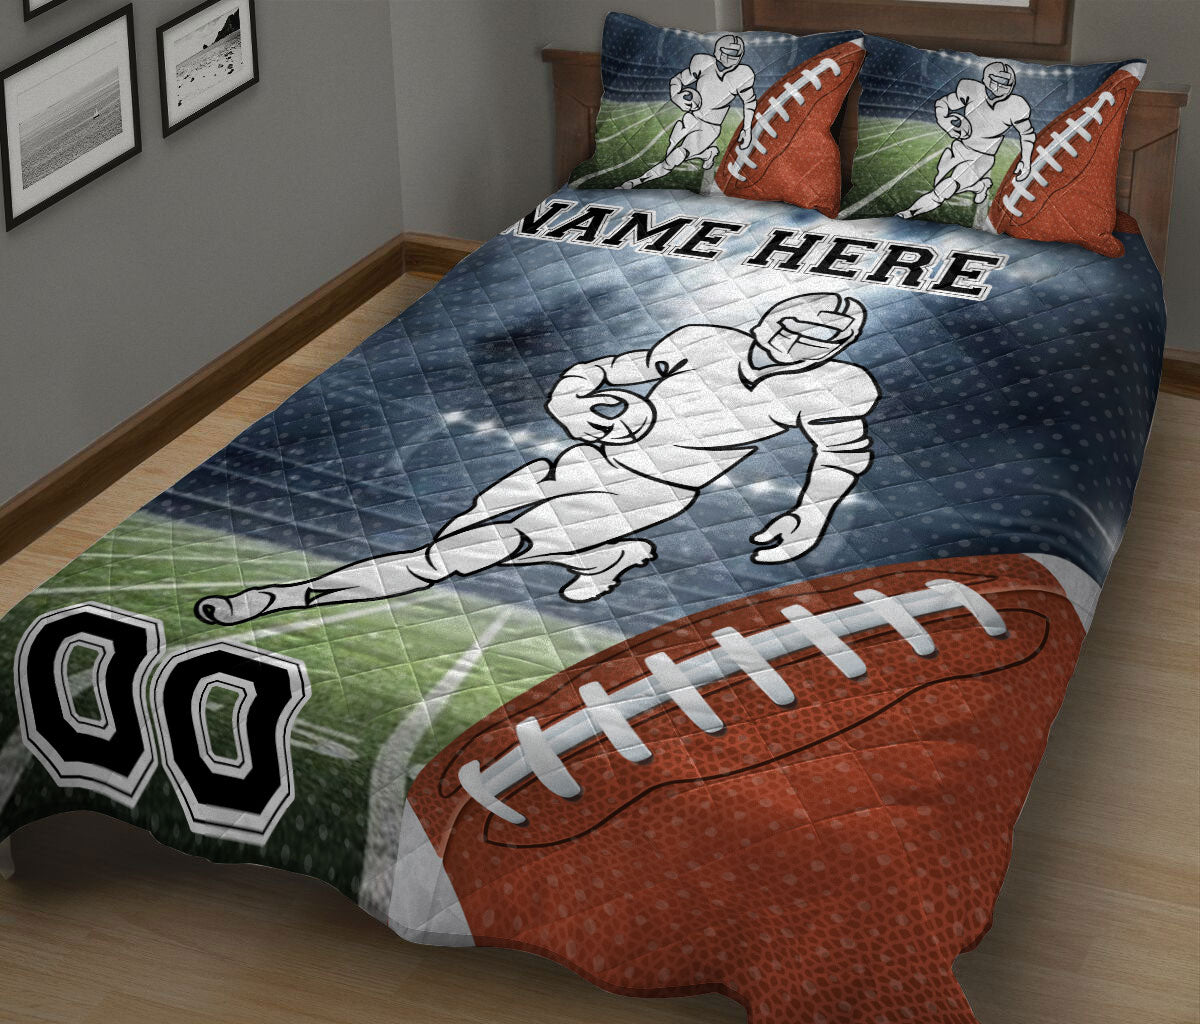 Ohaprints-Quilt-Bed-Set-Pillowcase-American-Football-Field-Pattern-Sports-Gifts-Custom-Personalized-Name-Number-Blanket-Bedspread-Bedding-1795-King (90'' x 100'')